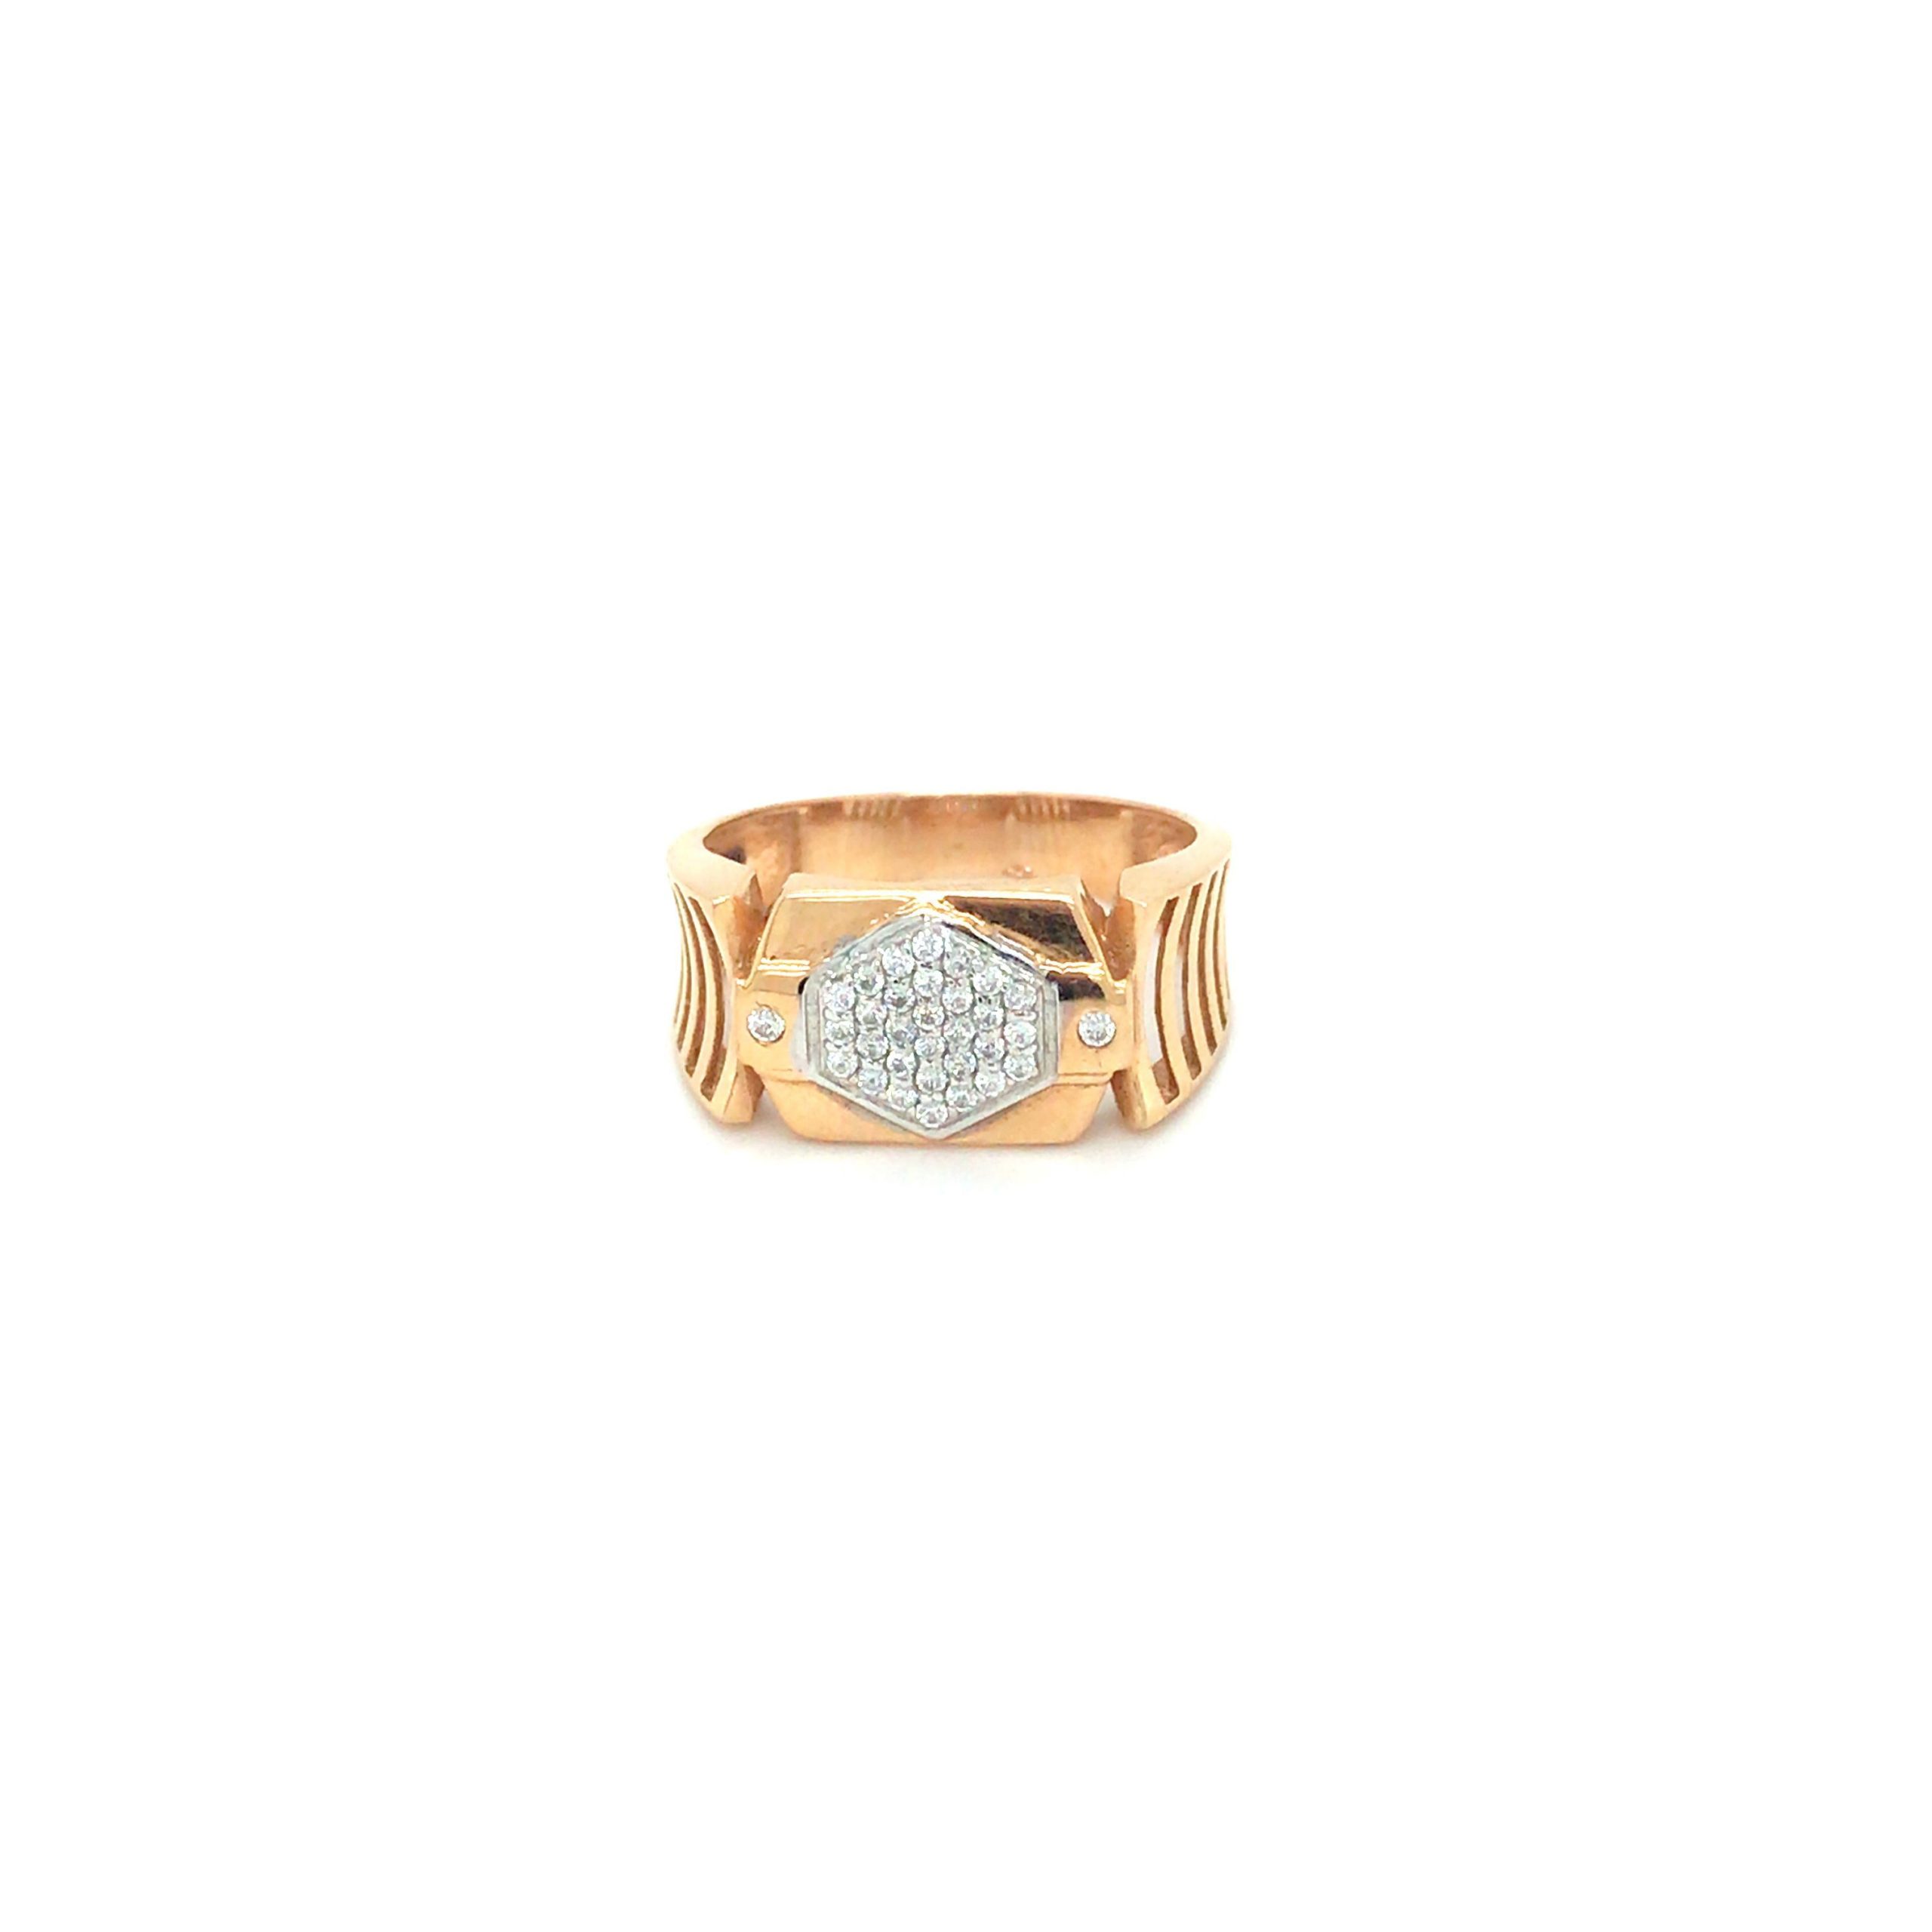 22 Karat Gold Mens Ring - RiMs26301 - US$ 607 - 22 Karat Gold Mens Ring.  Ring is excellently designed with Laser cuts and with high polish.